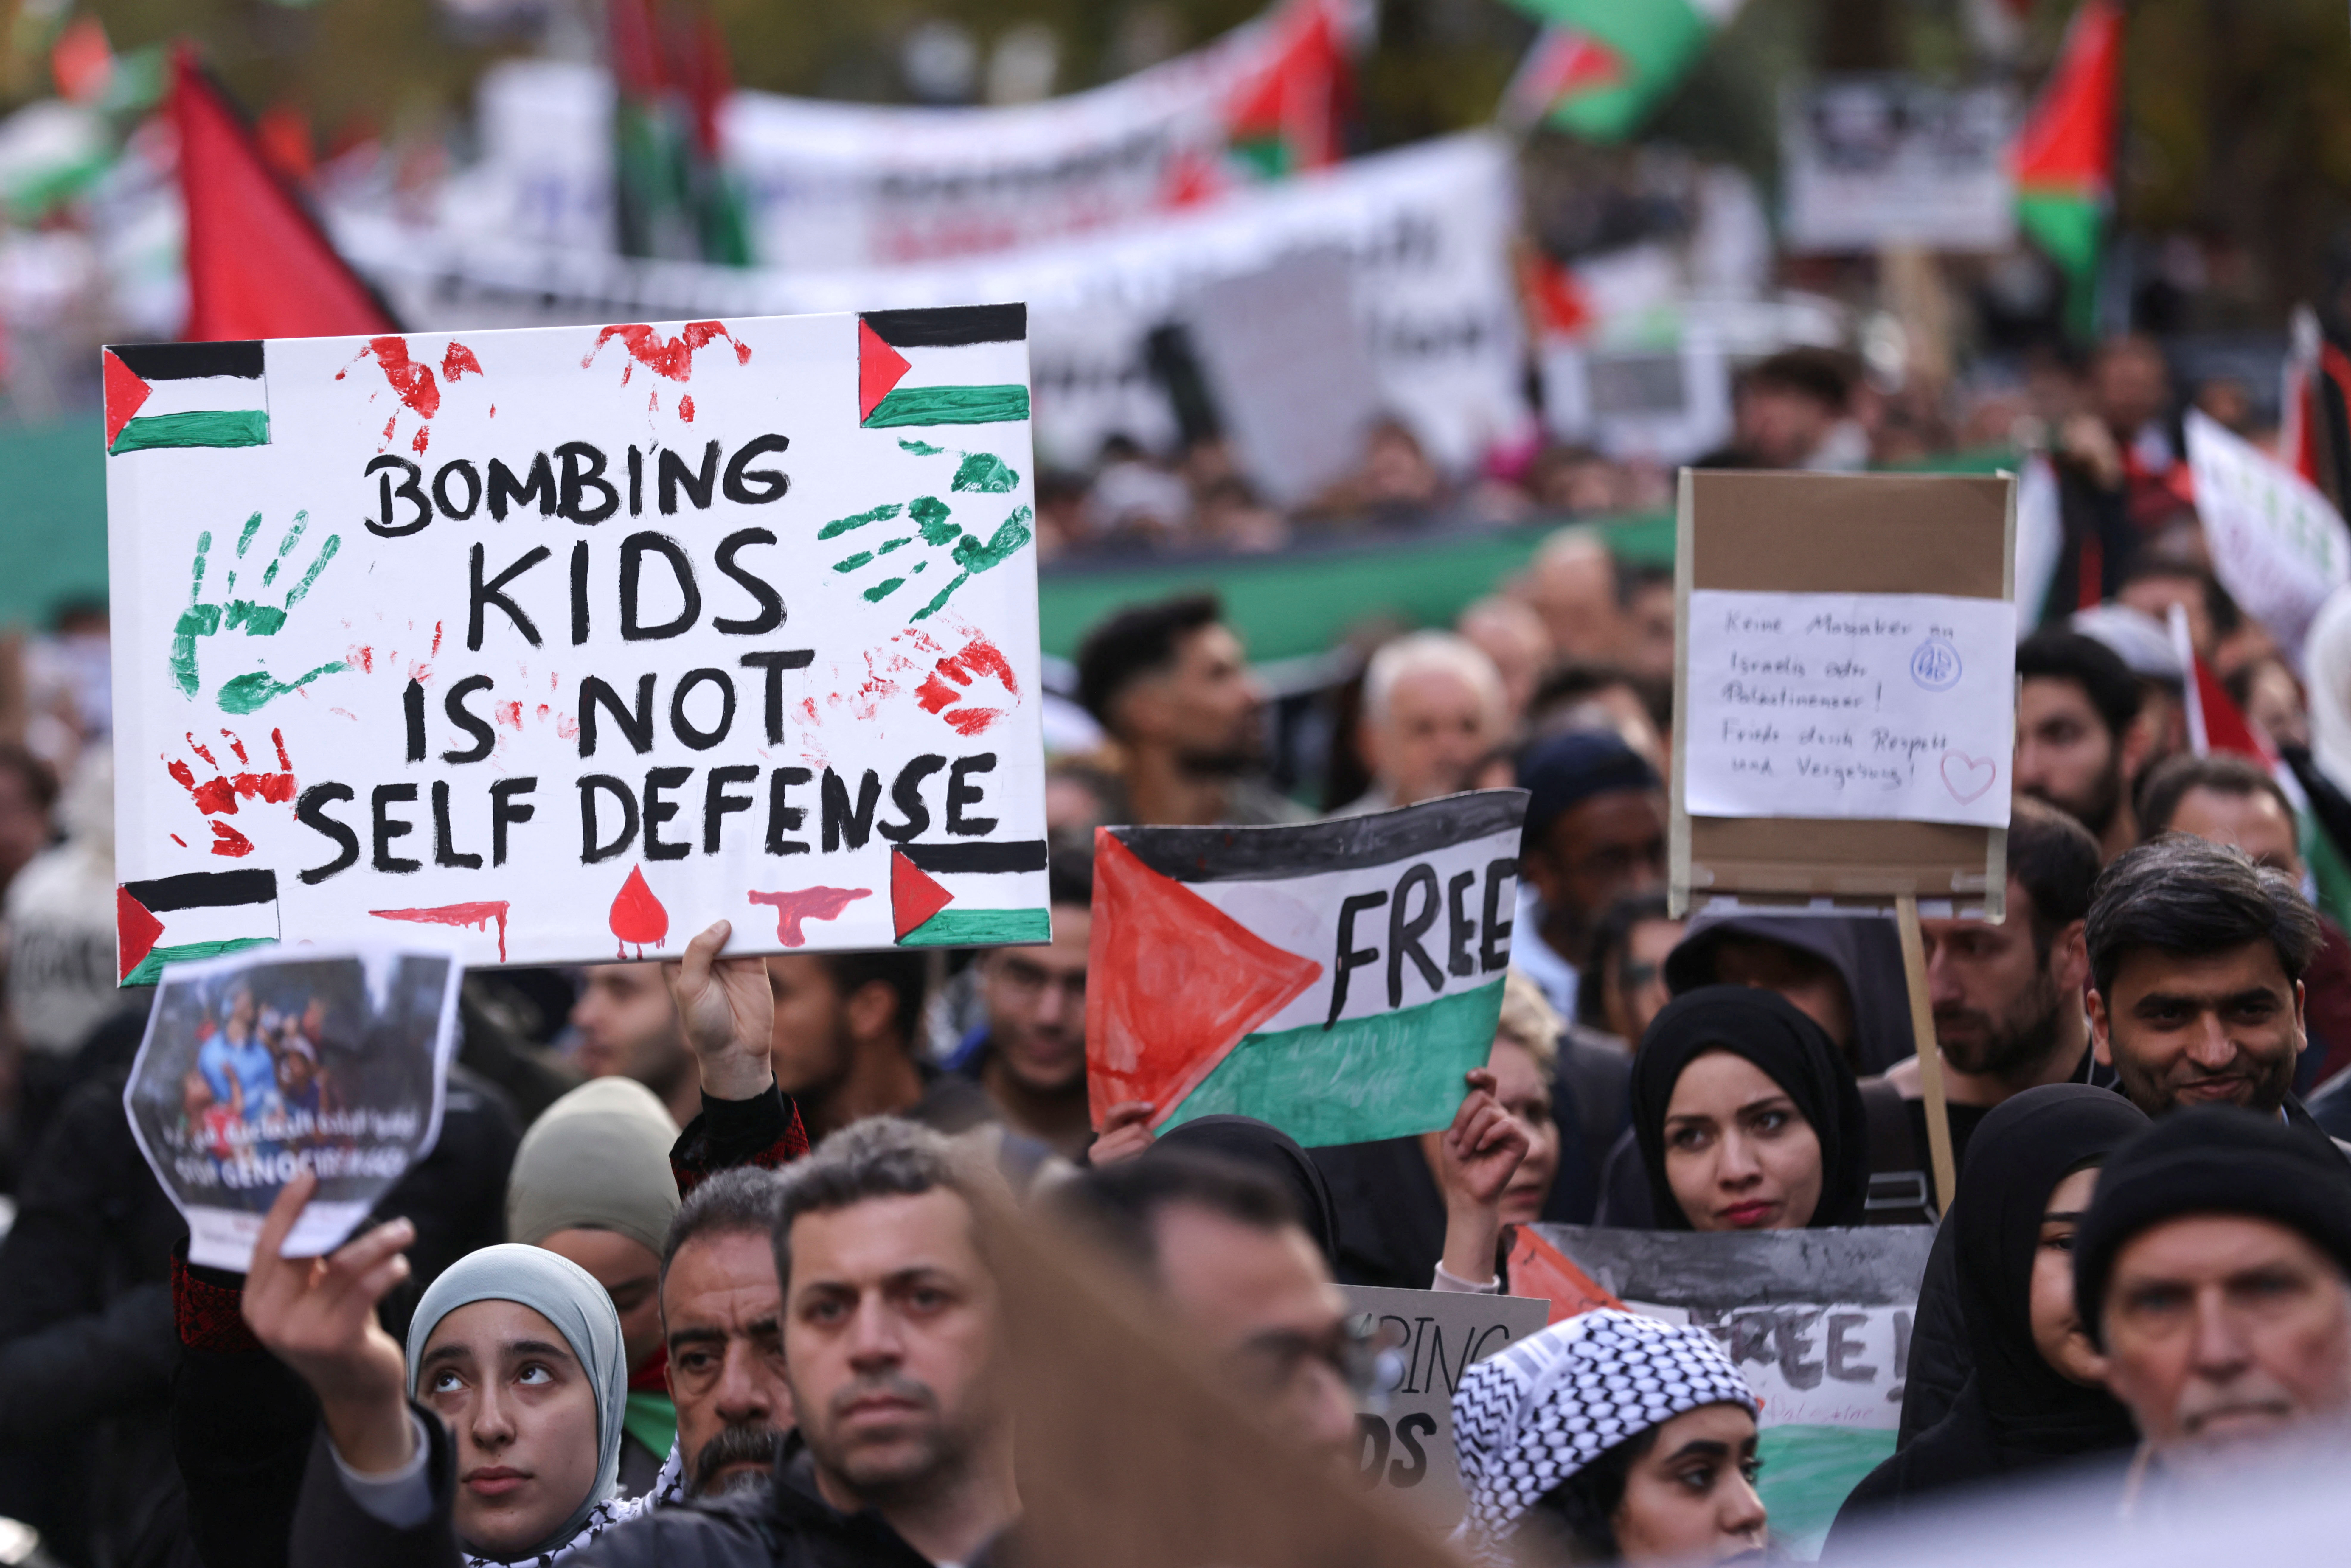 Demonstrators protest in solidarity with Palestinians in Gaza, amid the ongoing conflict between Israel and the Palestinian Islamist group Hamas, in Duesseldorf